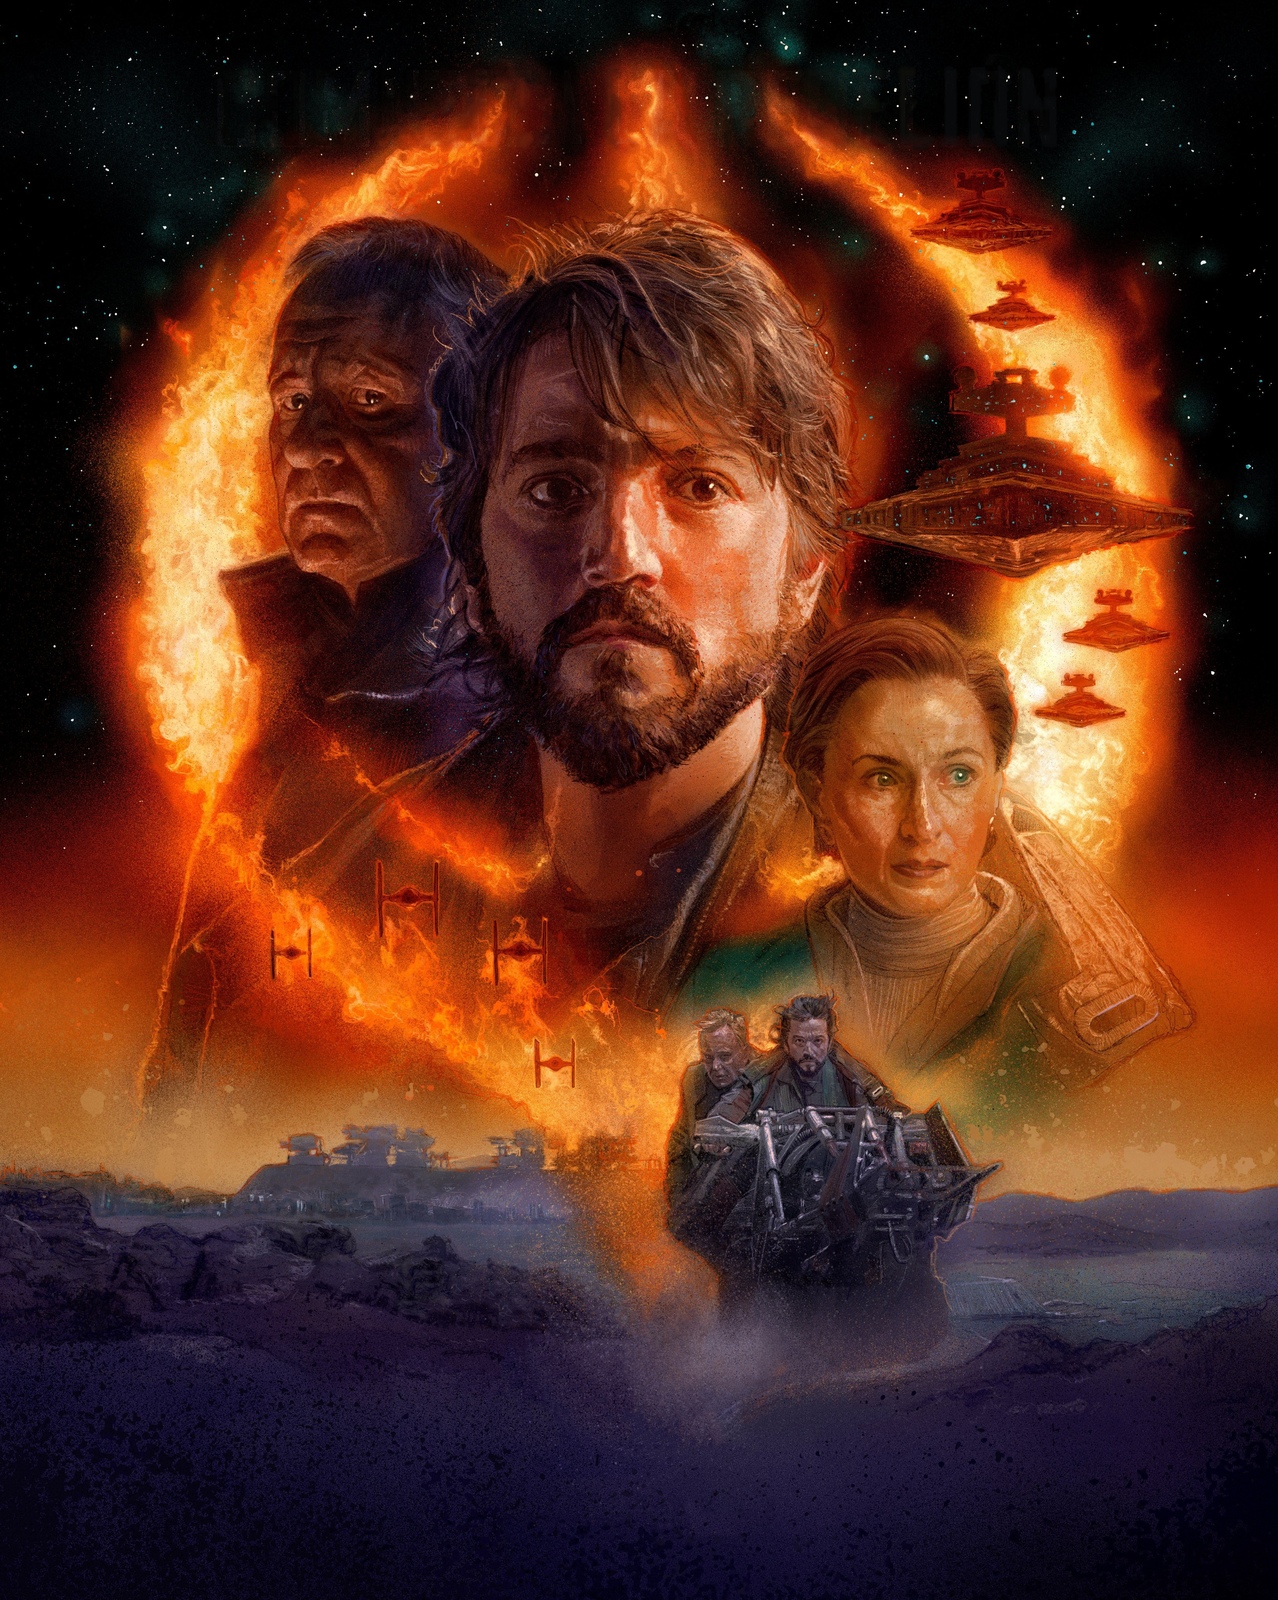 Primary image for Andor Poster Prequel To Star Wars Rogue One TV Series Art Print Size 24x36" #15